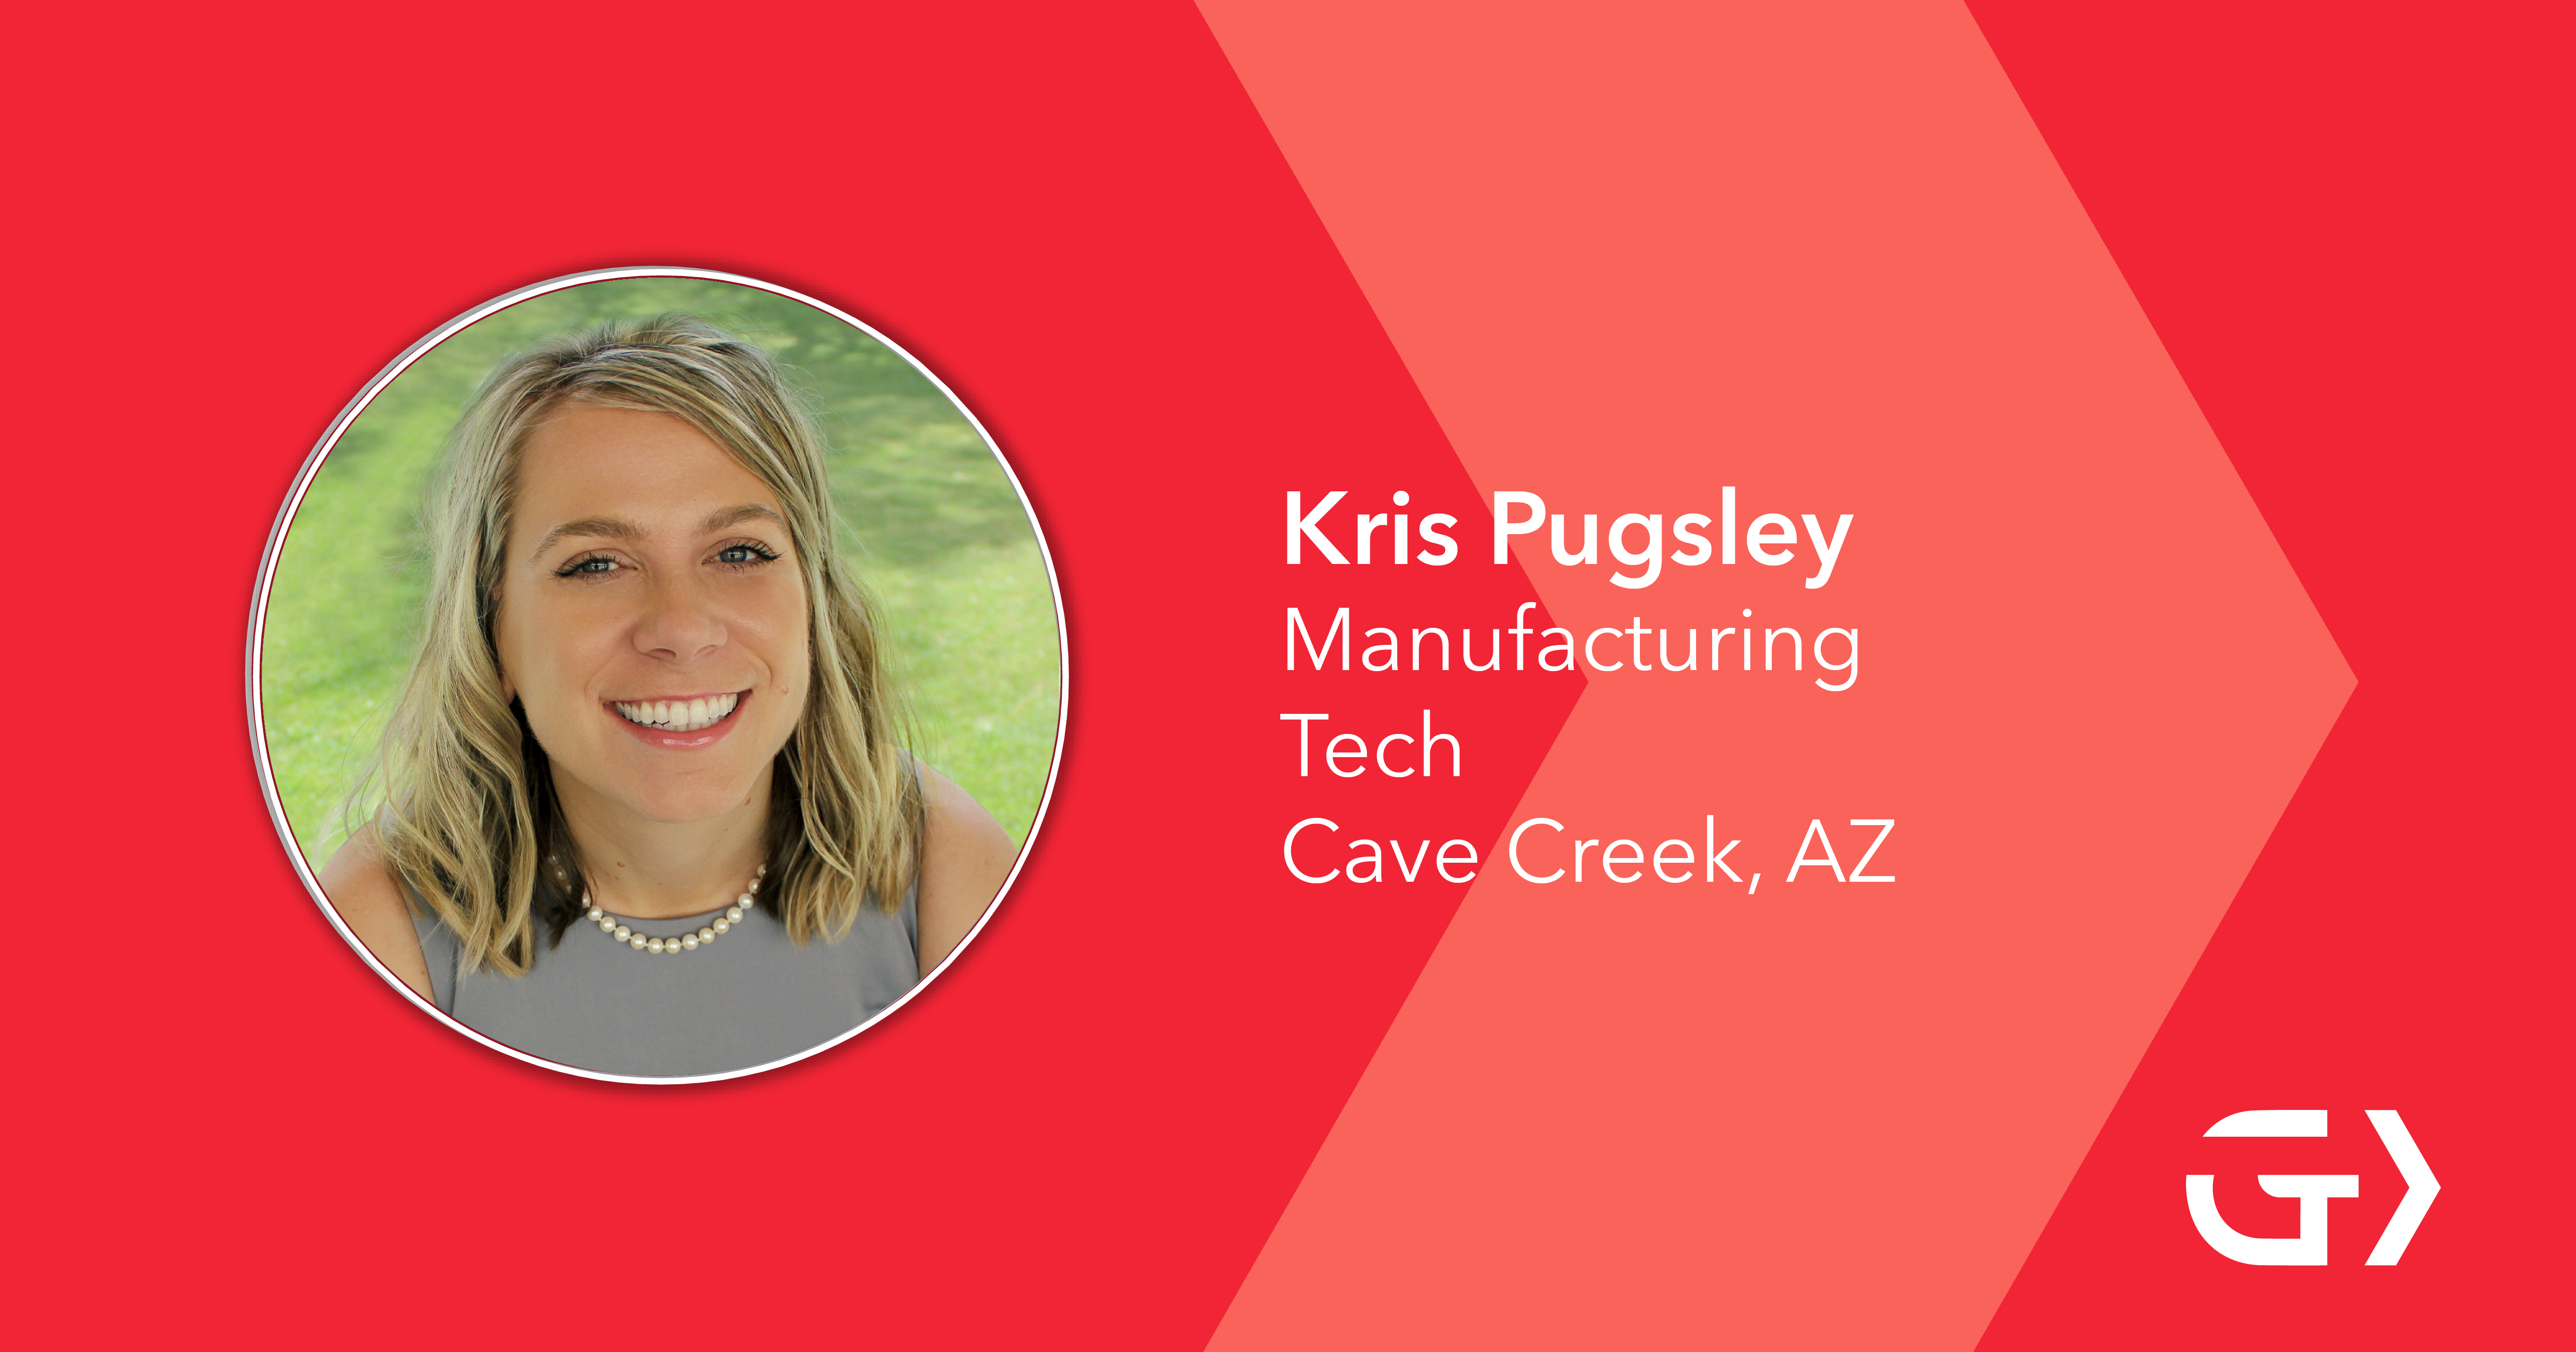 "Our tech scene continues to evolve and elevate with great companies such as mine based in the Valley," says Director Corporate Communications of ON Semiconductor Kris Pugsley. "It's great to see such a great presence here in Phoenix."